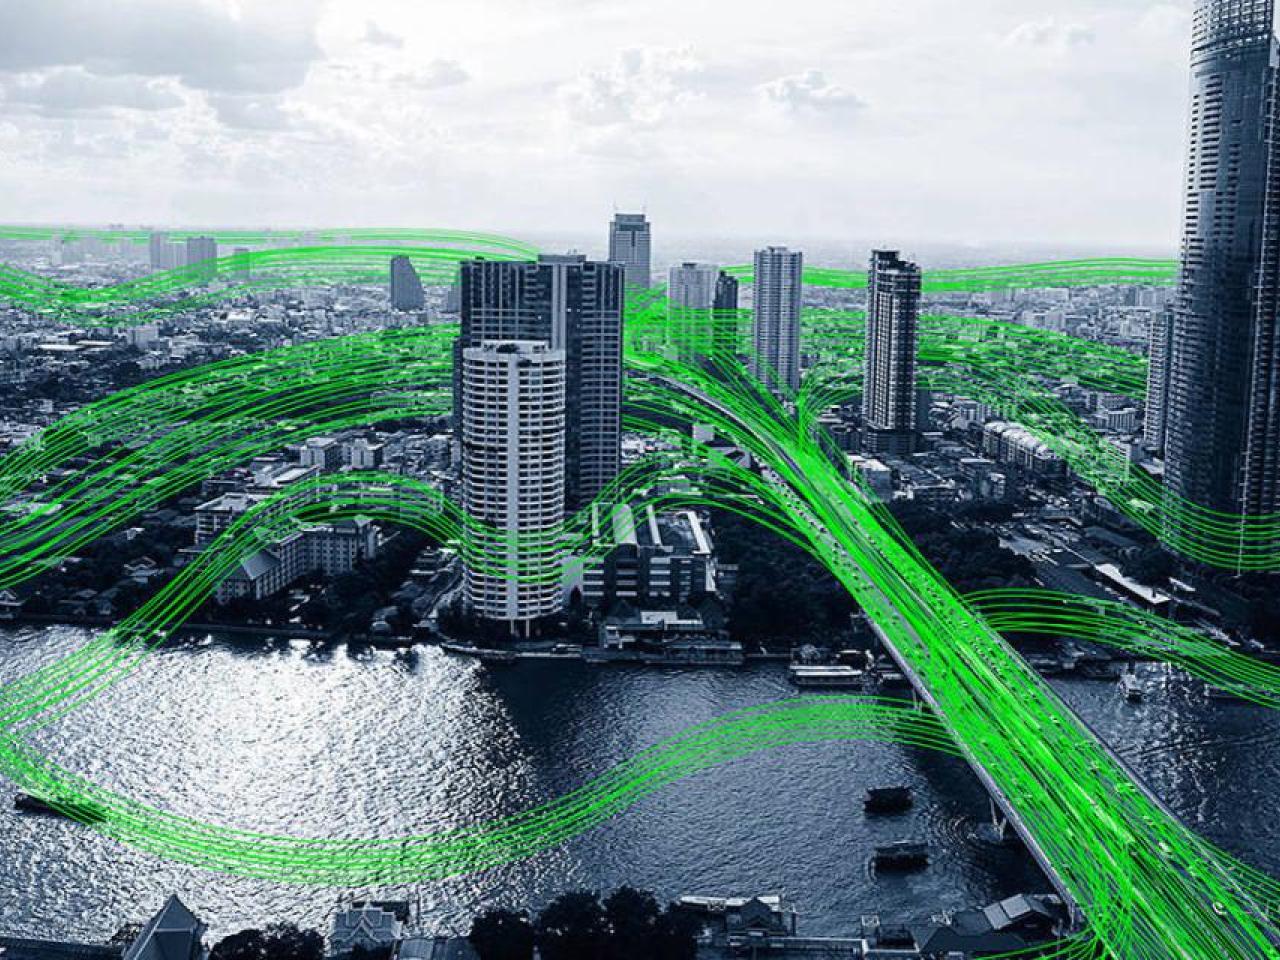 City shown with green waves going through out